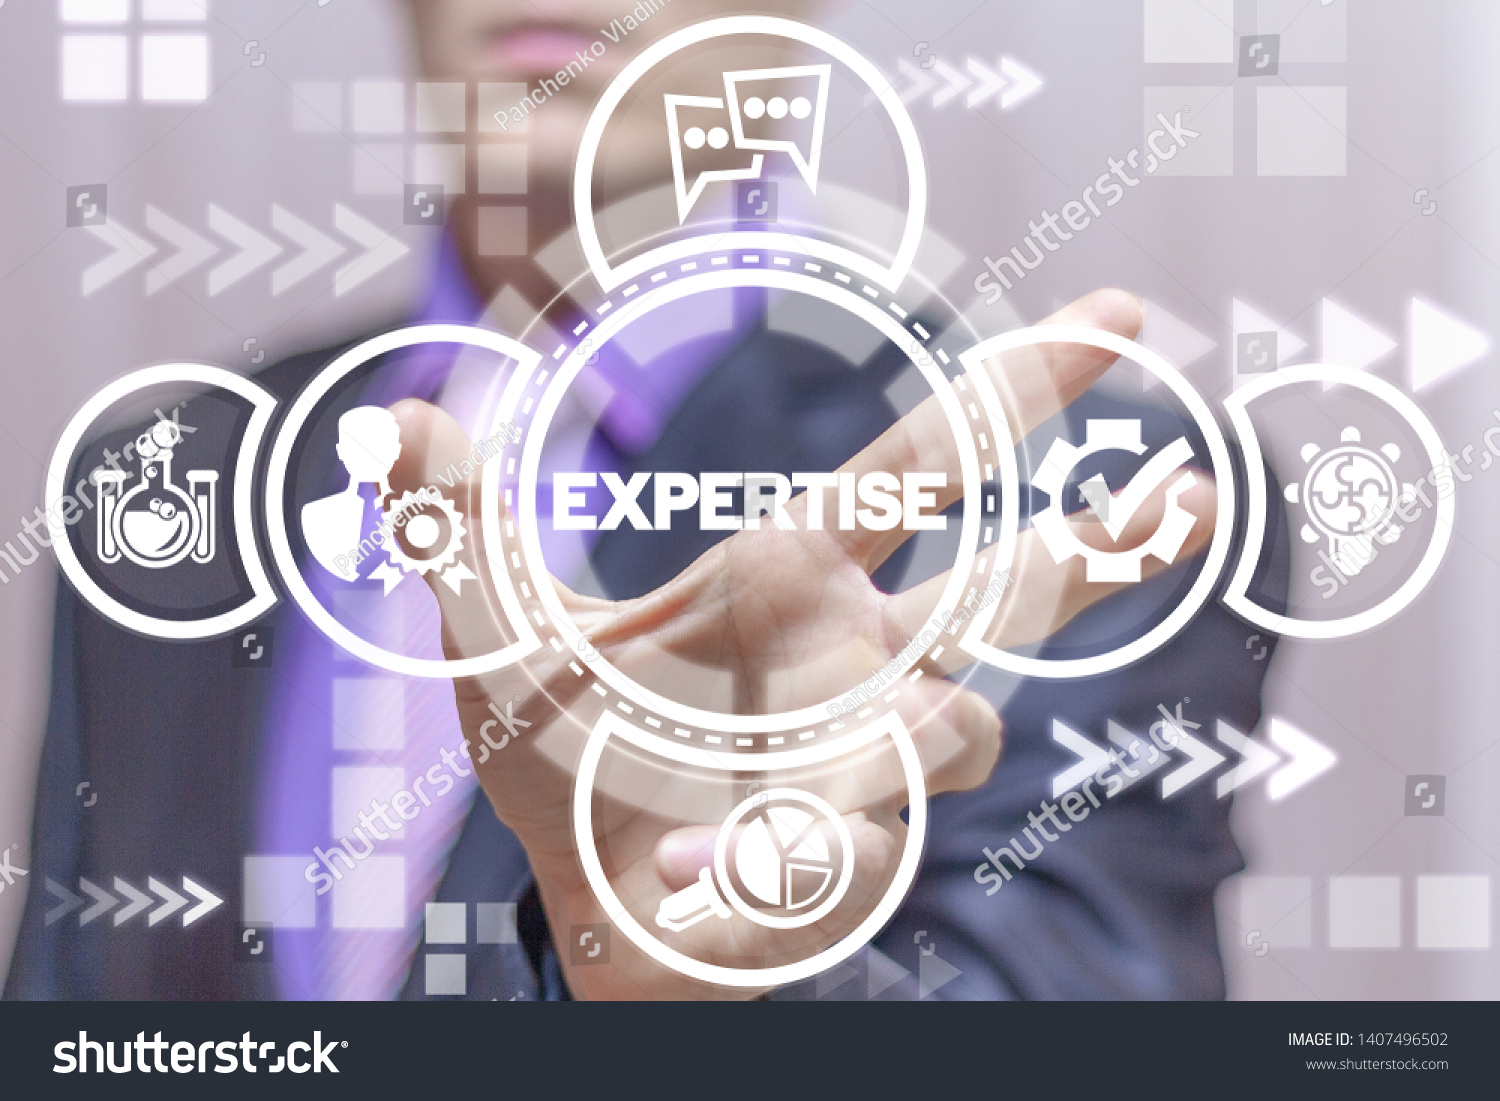 Expert uses on a virtual screen of the future and sees the word: EXPERTISE. Expertise Business Professional Support Review concept. #1407496502